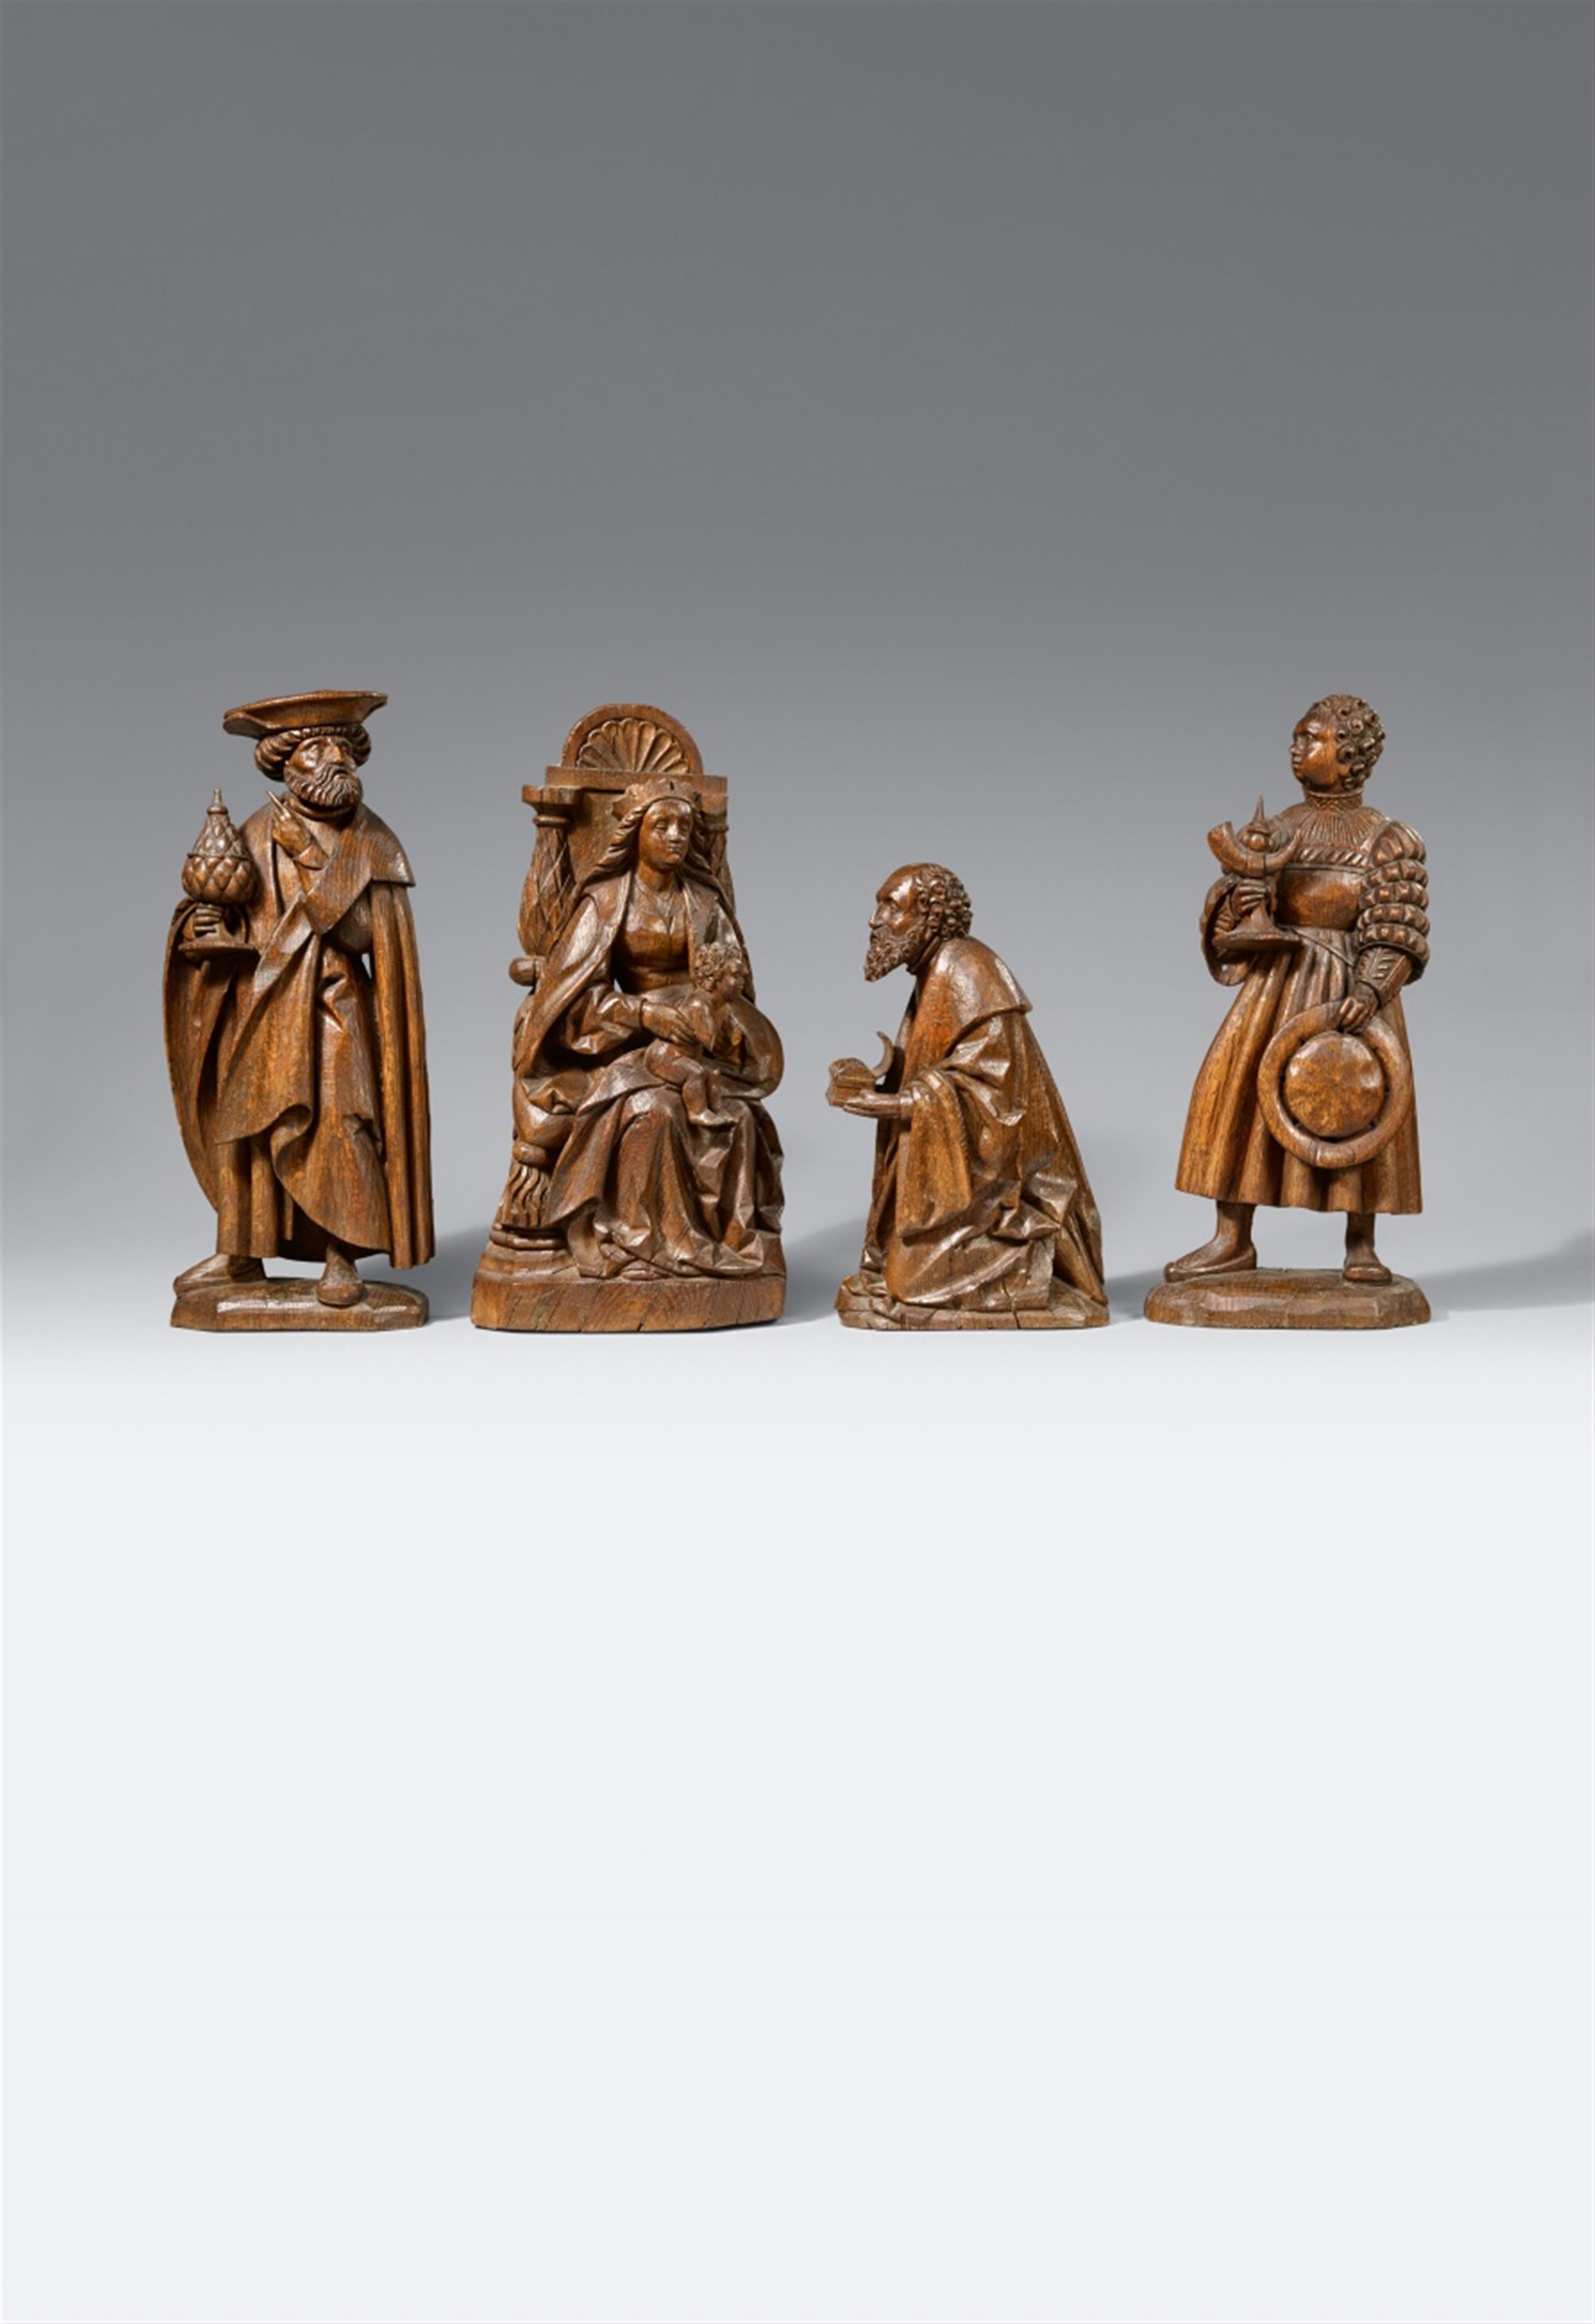 Flemish circa 1525/1535 - A Flemish carved oak relief of the Adoration of the Magi, circa 1525/1535 - image-1